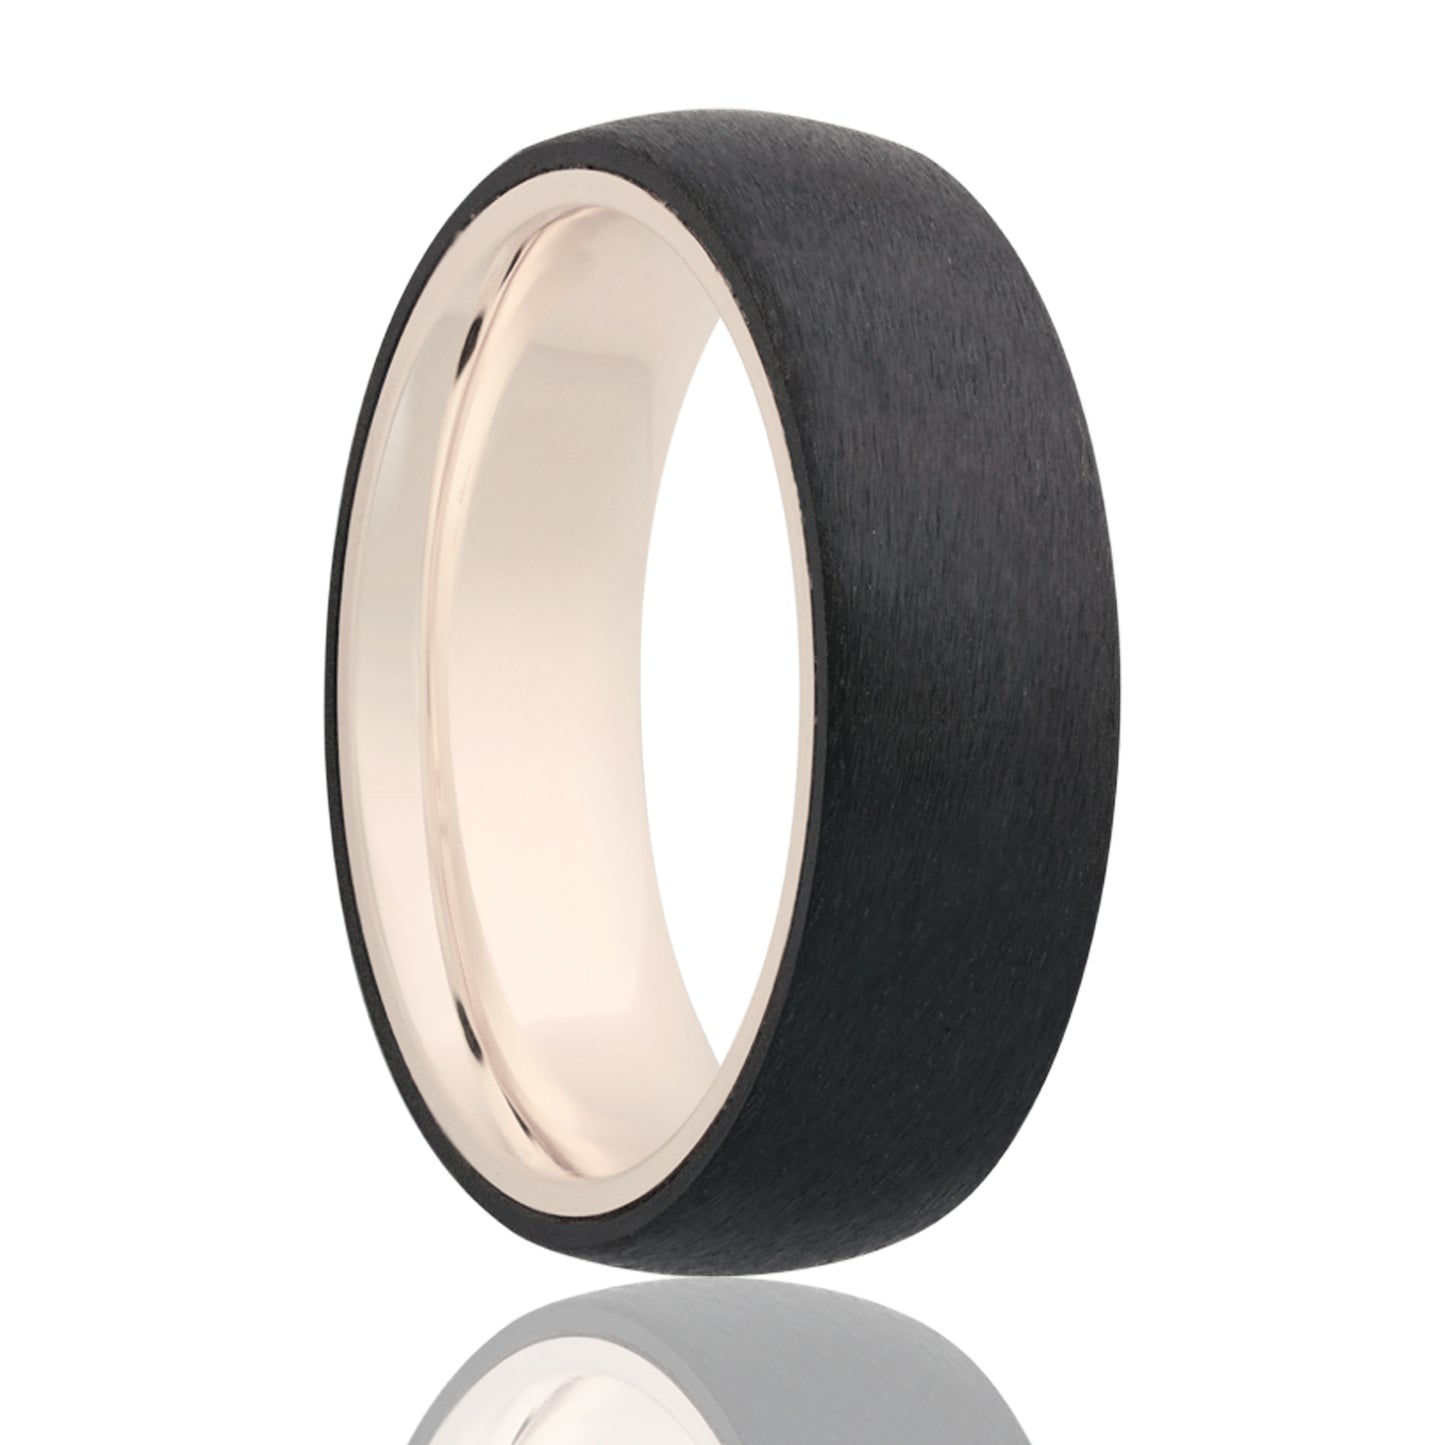 A satin finish wedding band with contrasting 14k white gold interior displayed on a neutral white background.